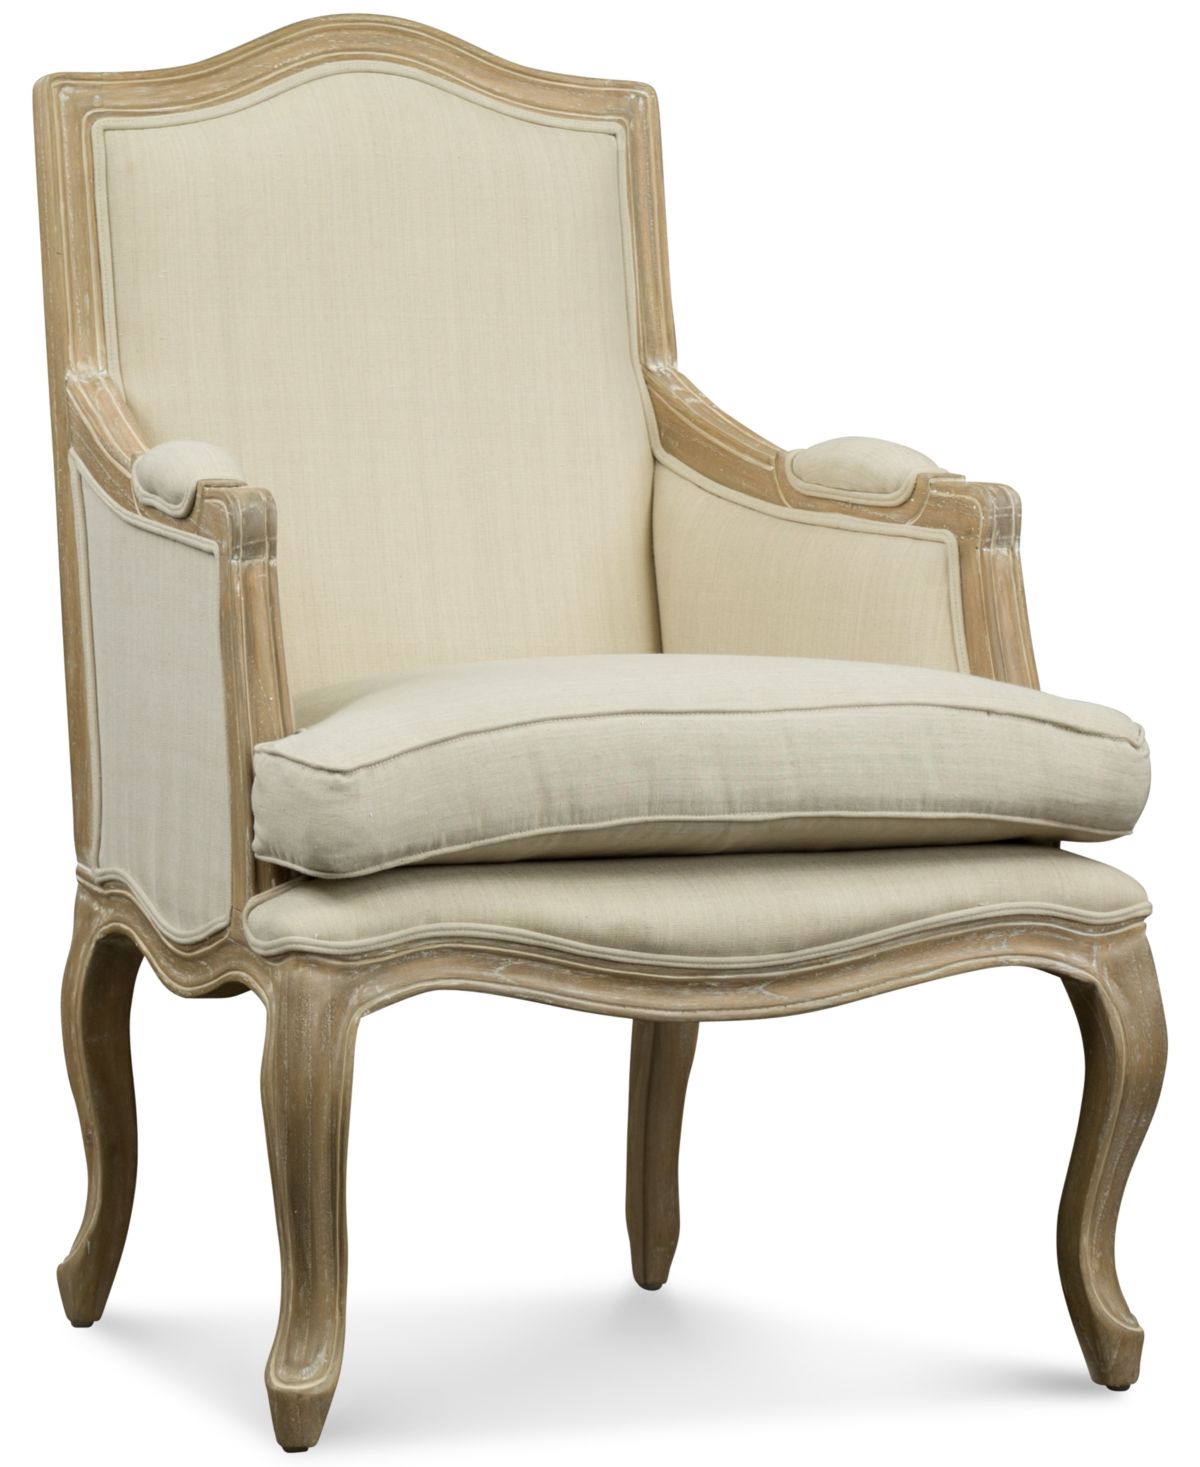 Kempler Wood Traditional French Accent Chair | Macys (US)